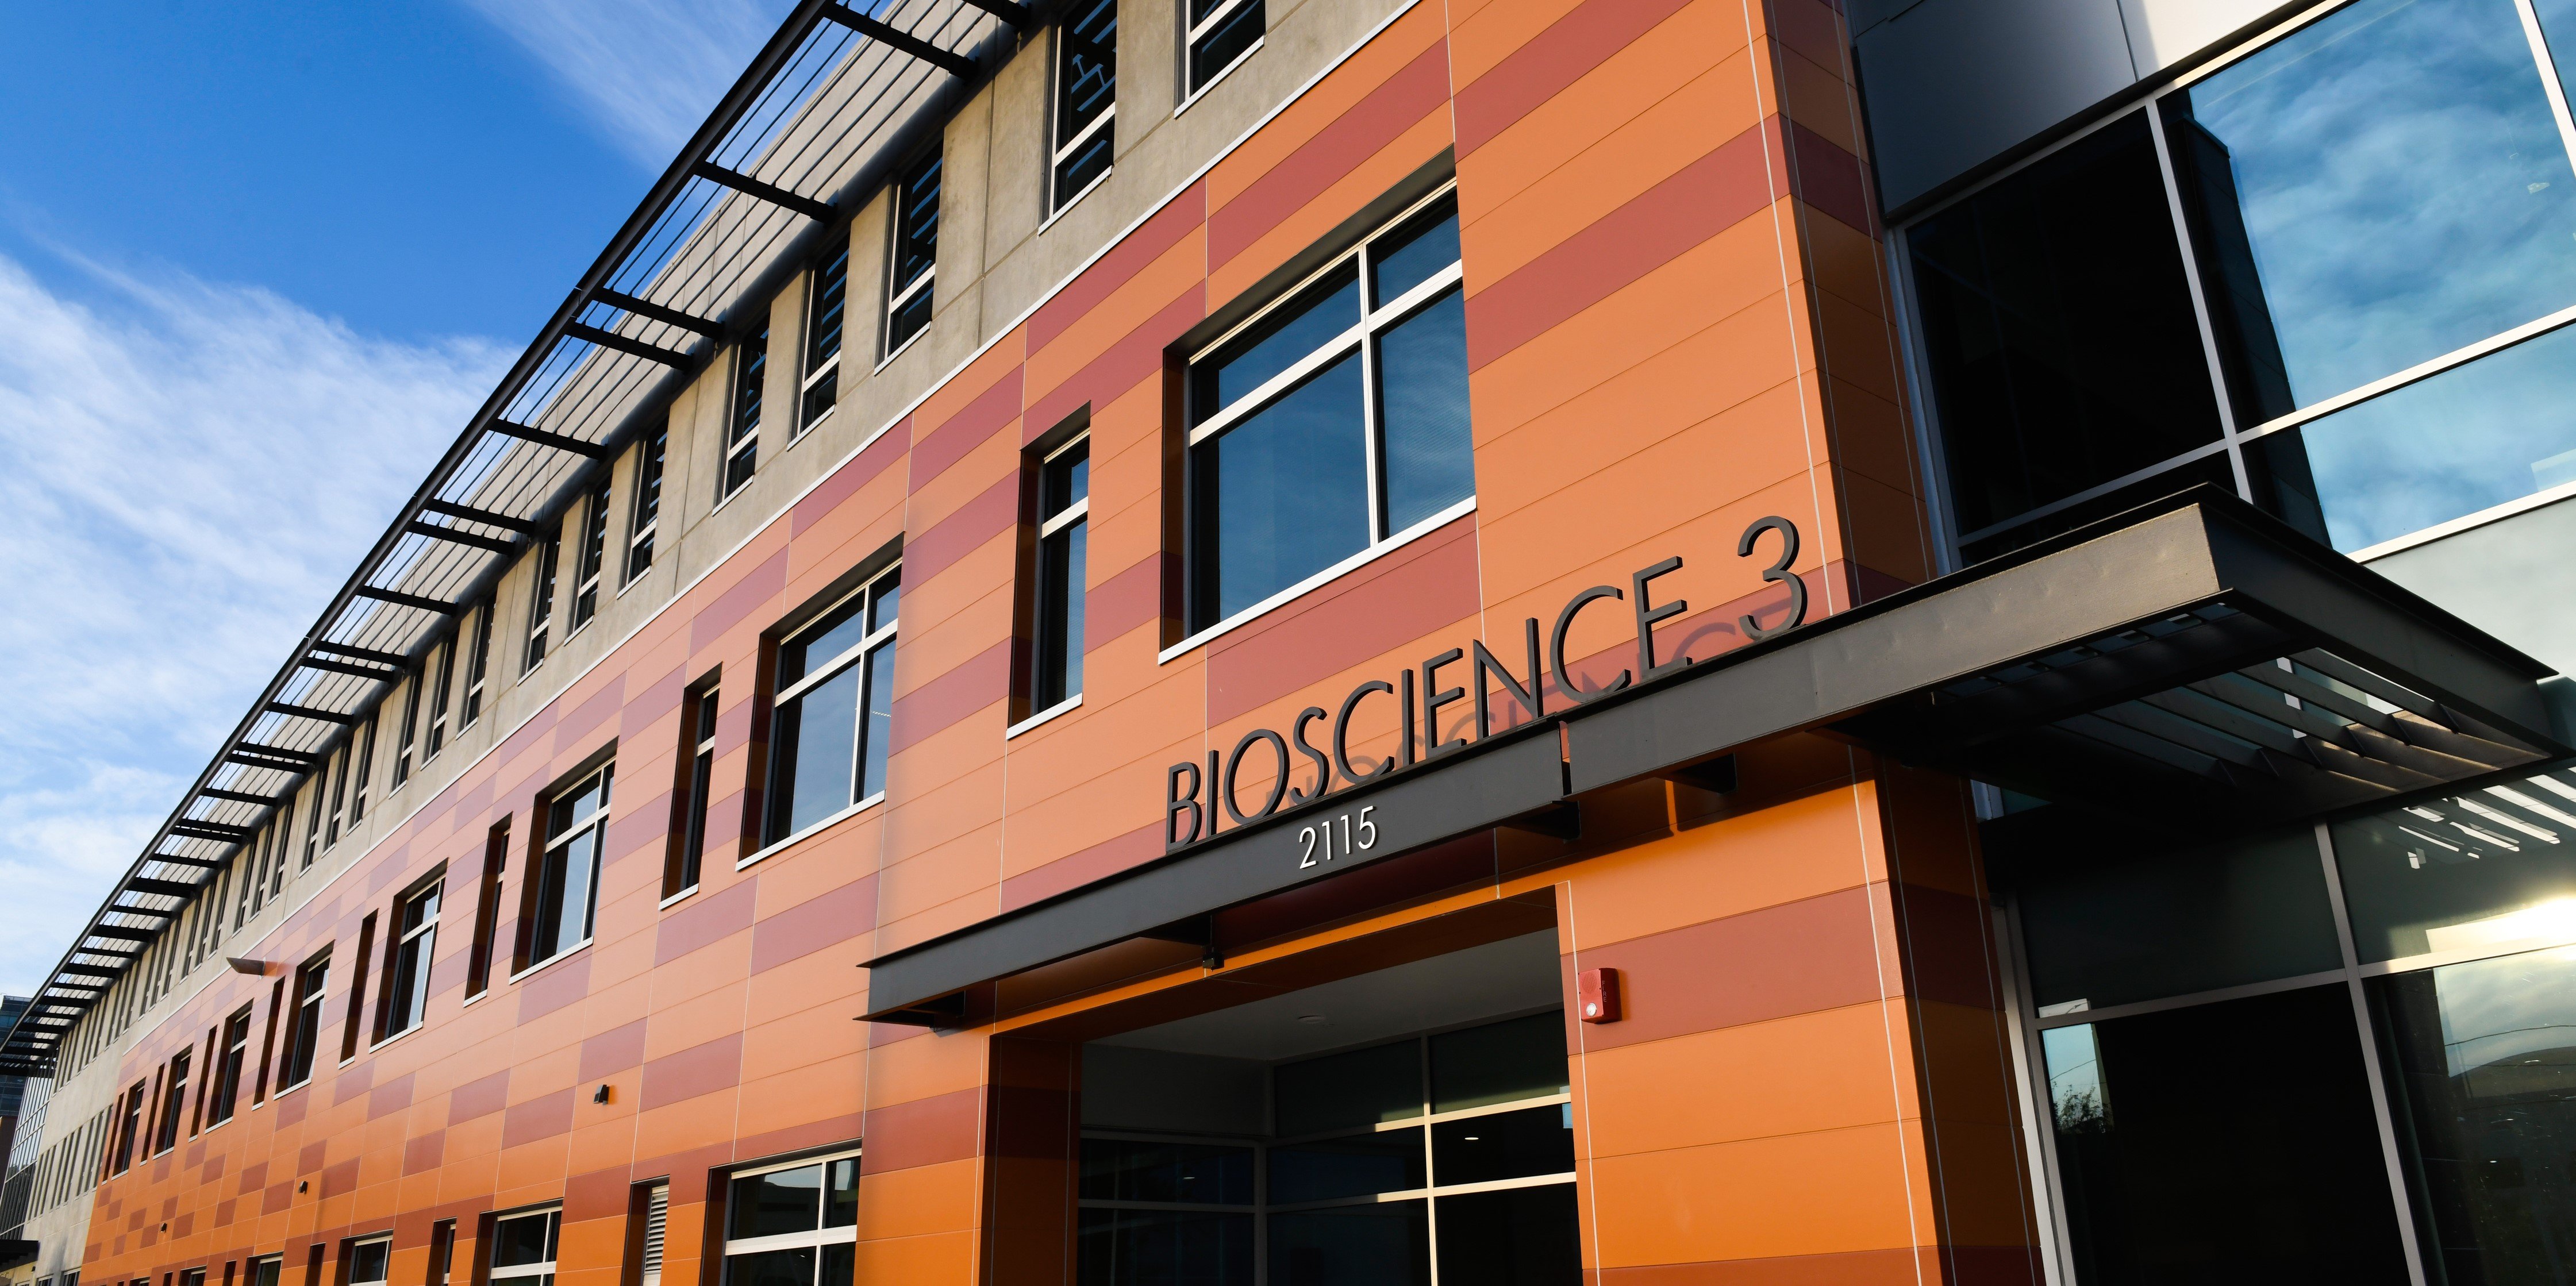 Center for Surgical Innovation at Bioscience 3